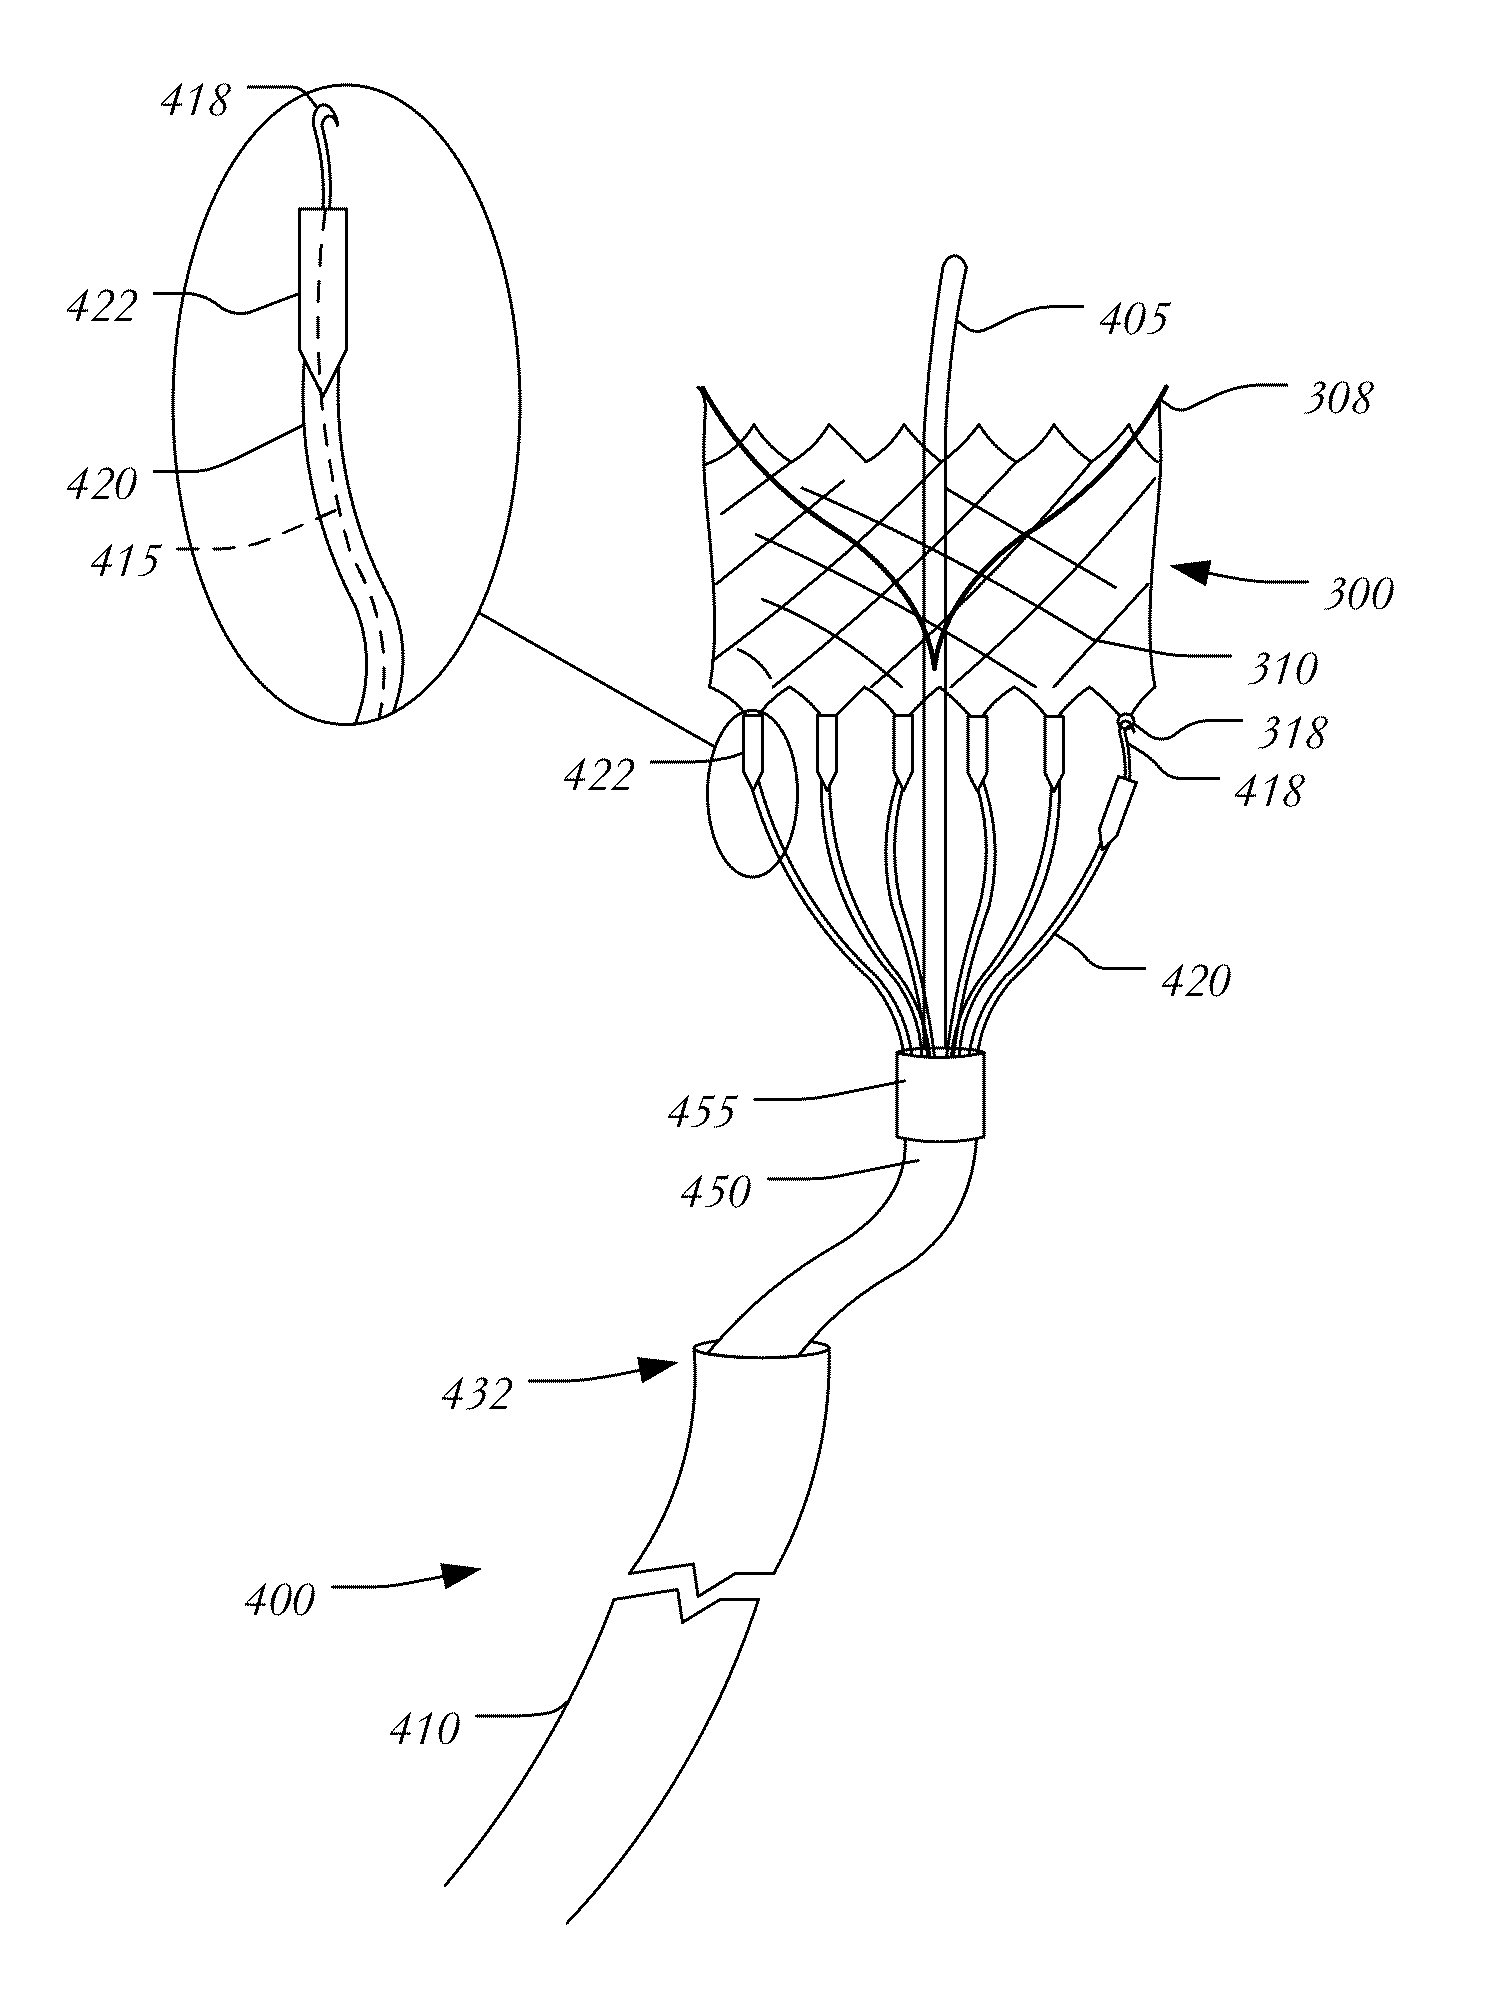 Transapical Mitral Valve Replacement